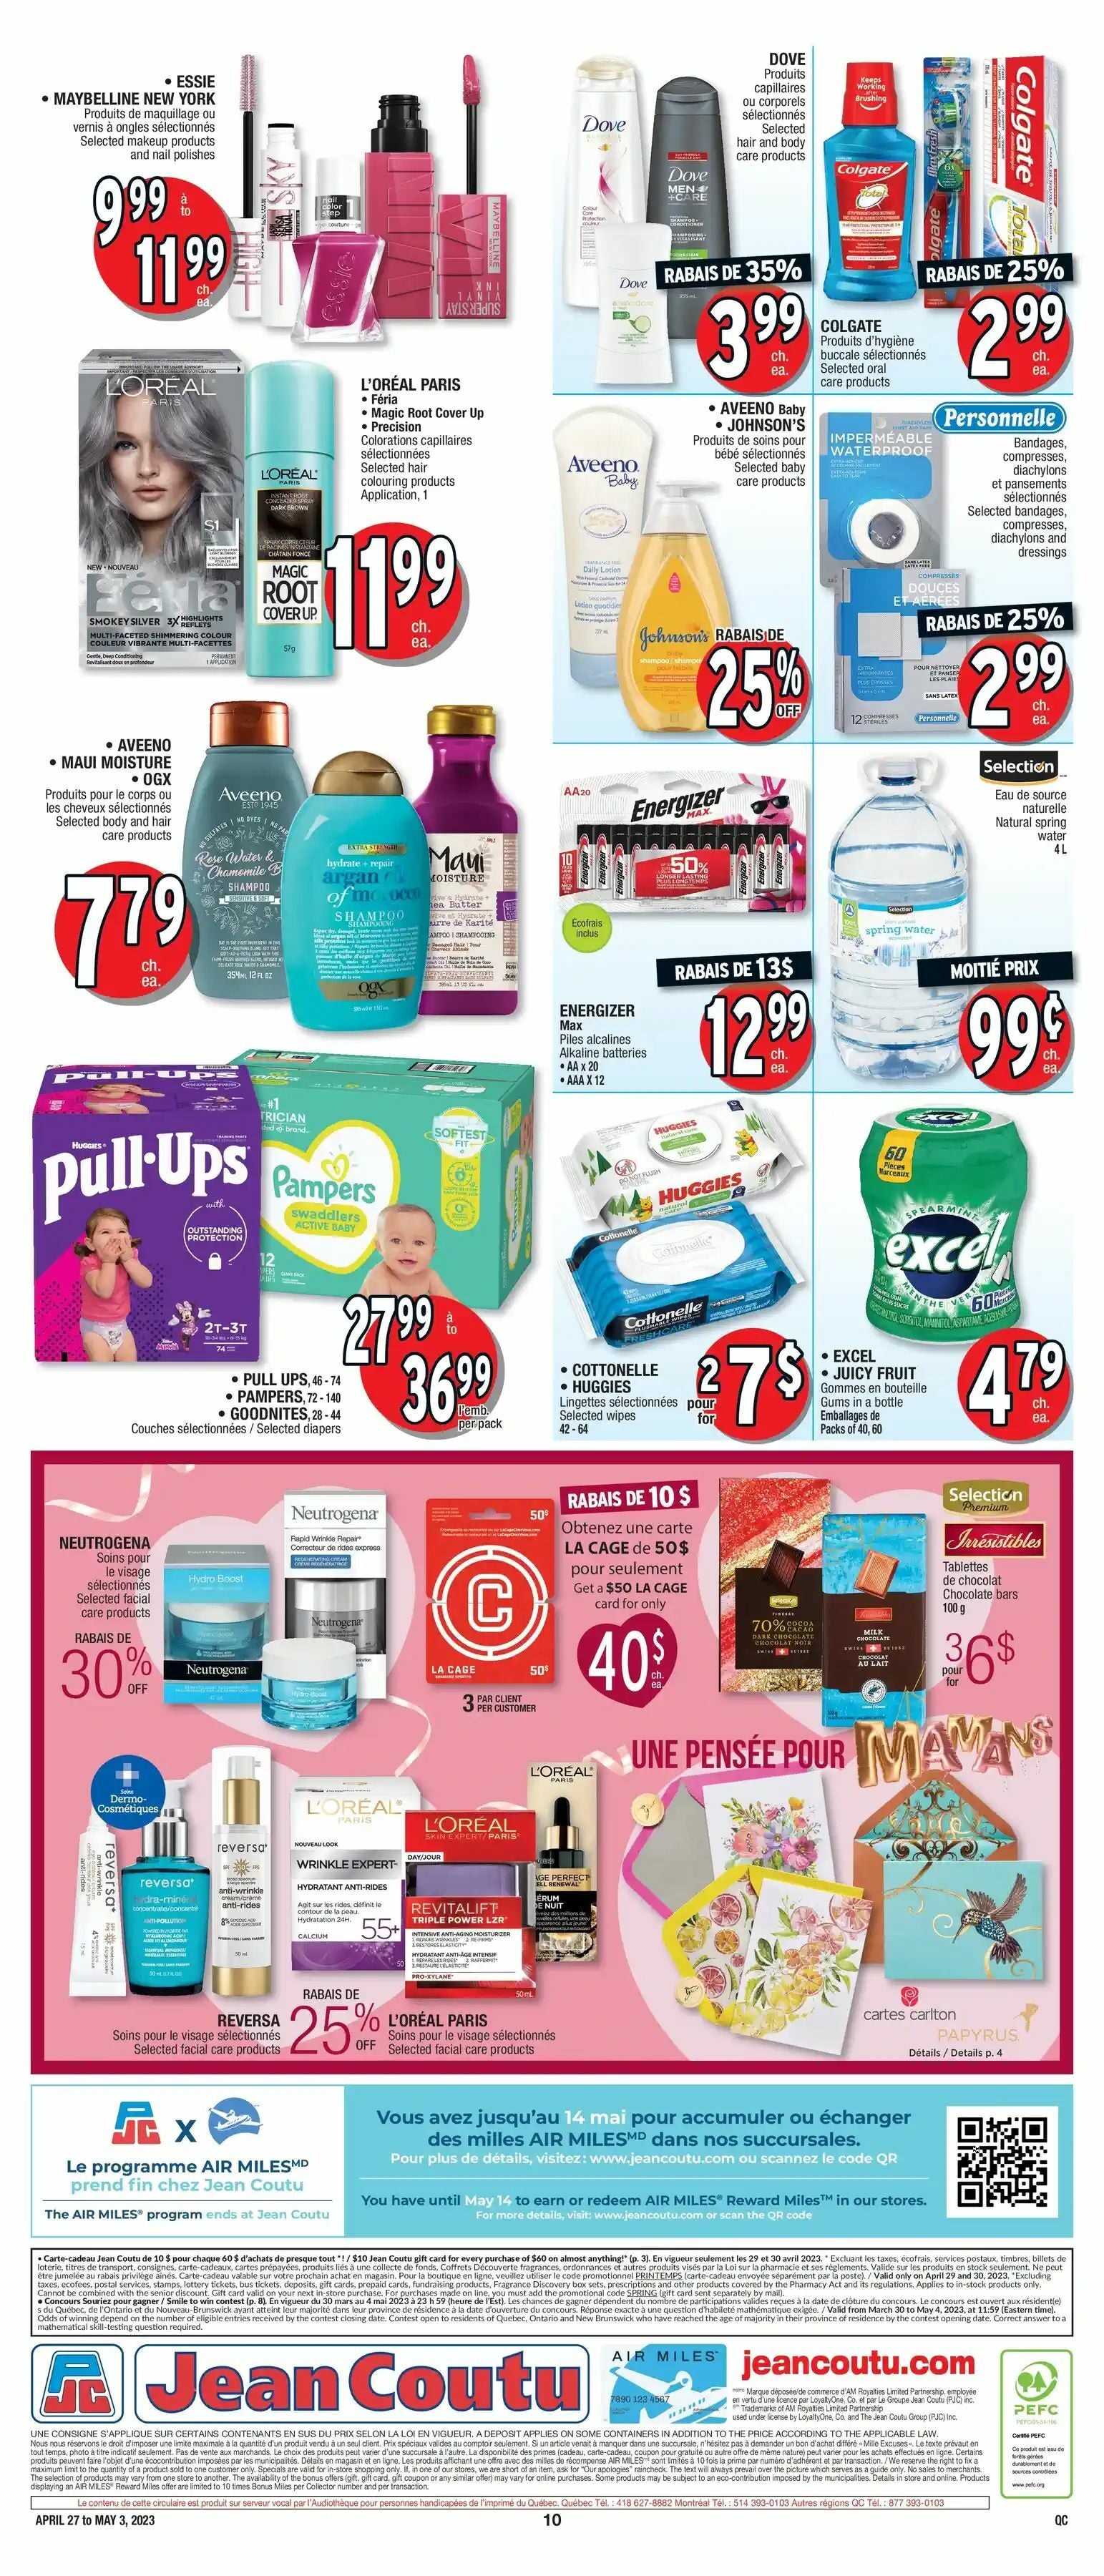 Jean Coutu Weekly Flyer - Weekly Deals (QC) - Apr 27 – May 3